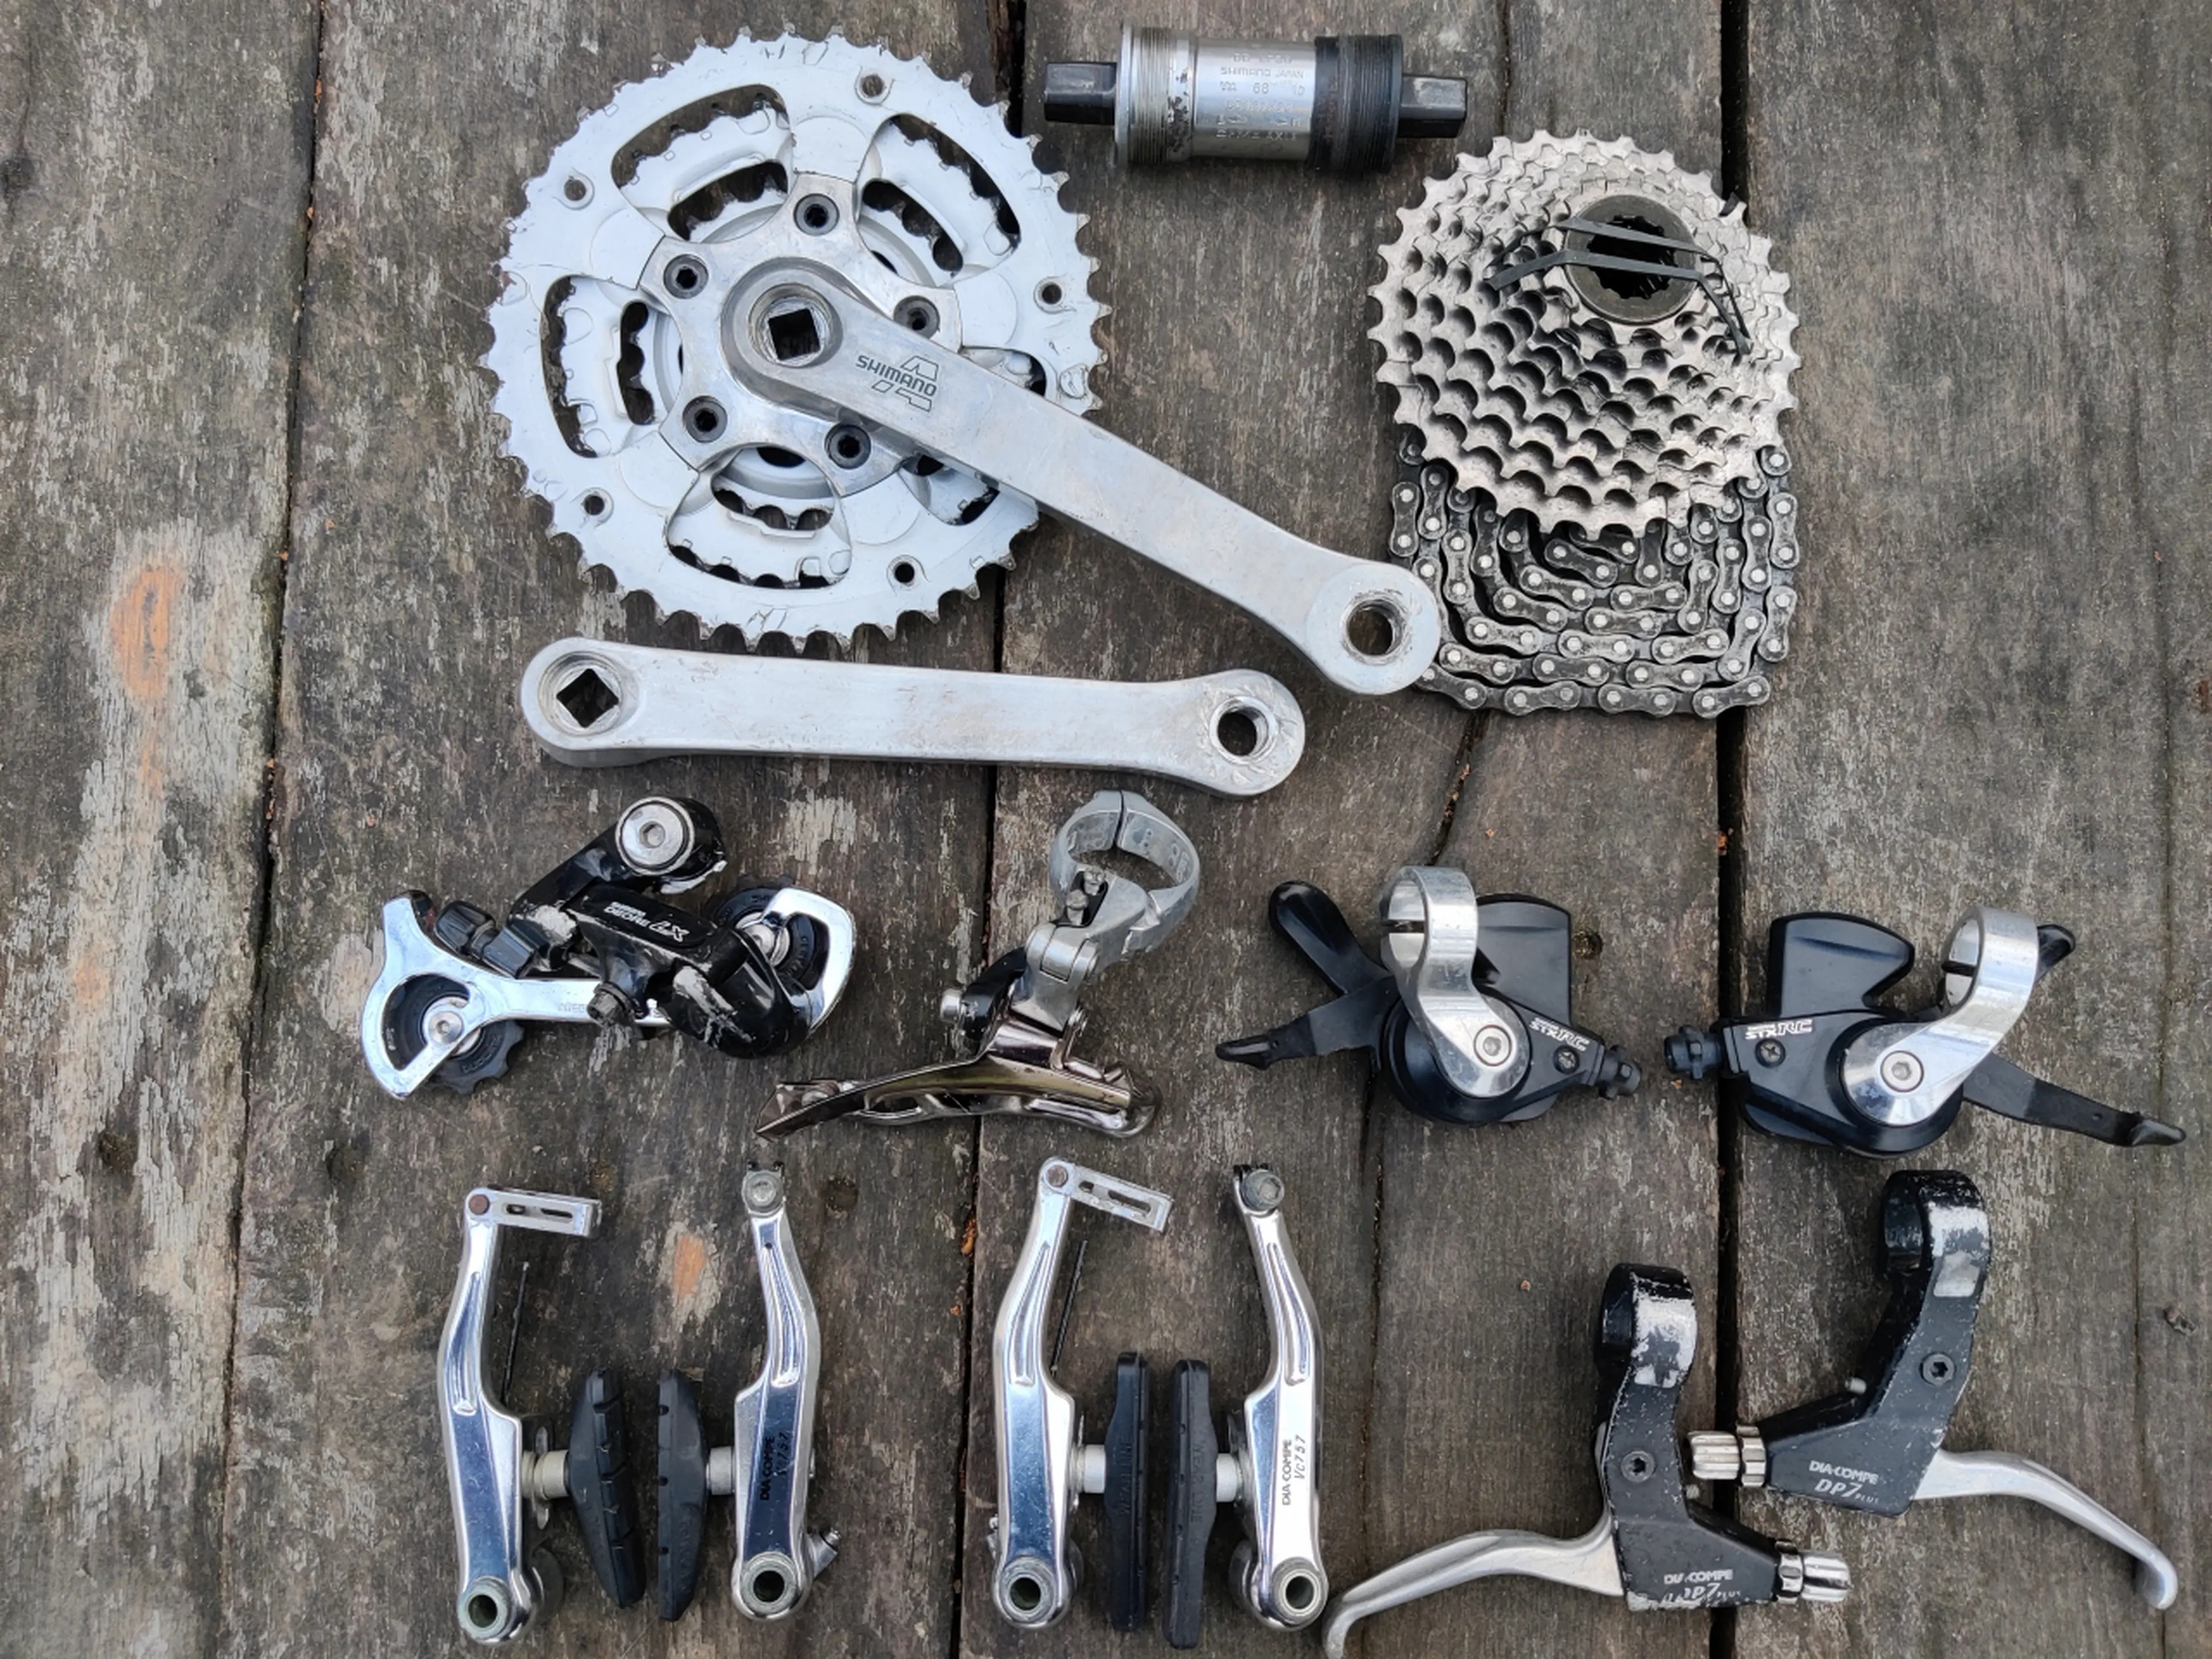 1. Groupset complet Mtb Shimano Deore LX / Stx-Rc / Dia-Compe 3x8v